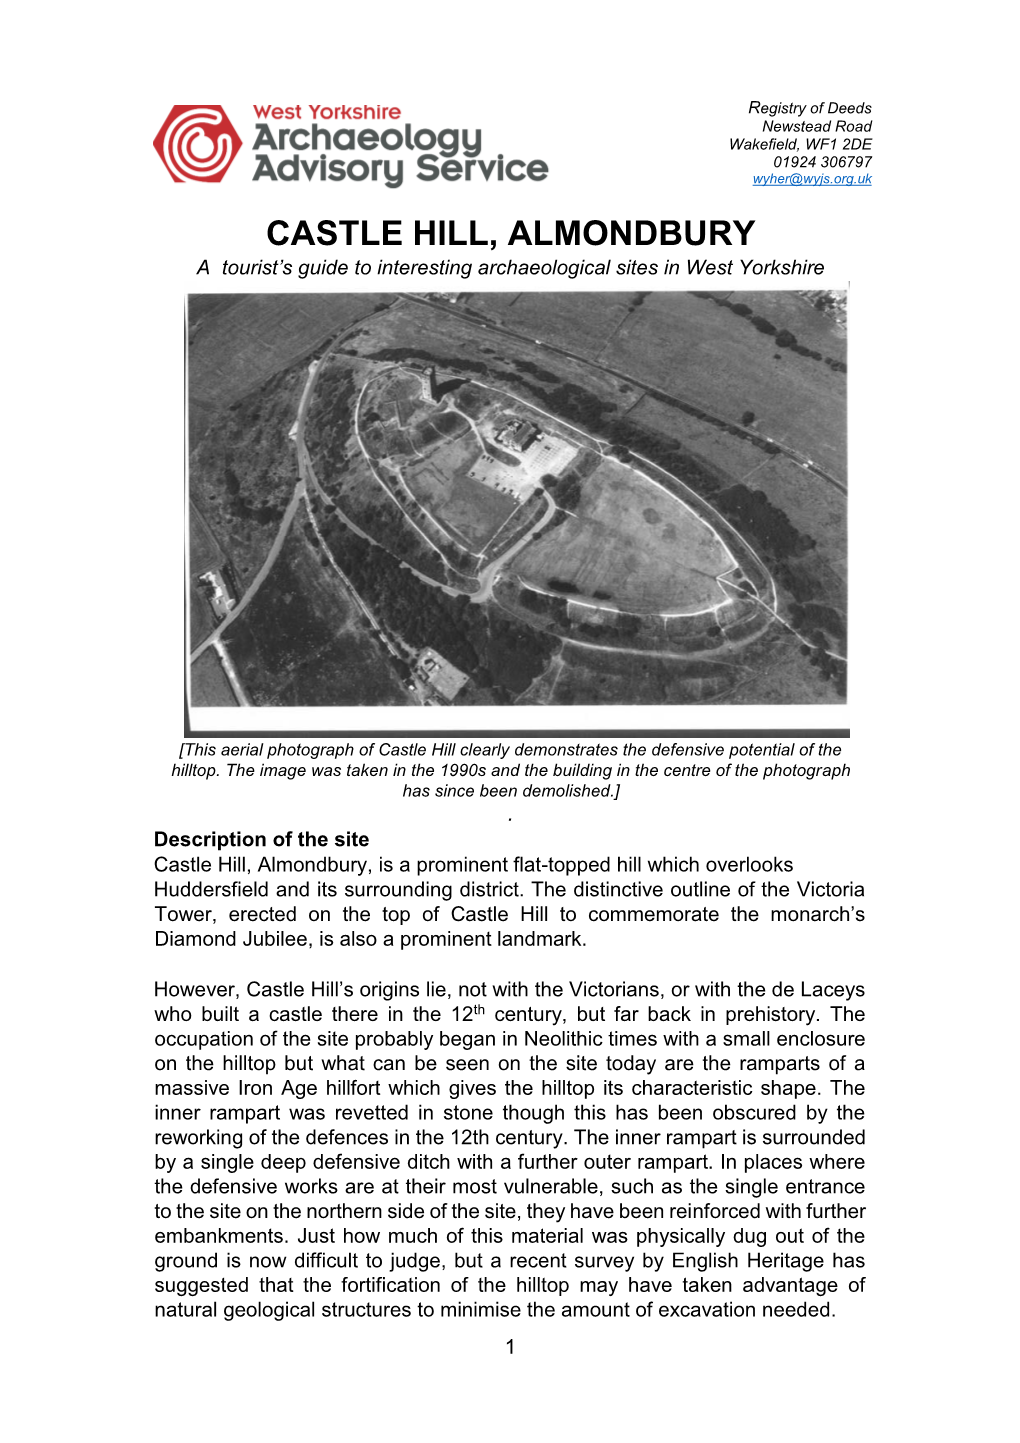 CASTLE HILL, ALMONDBURY a Tourist’S Guide to Interesting Archaeological Sites in West Yorkshire